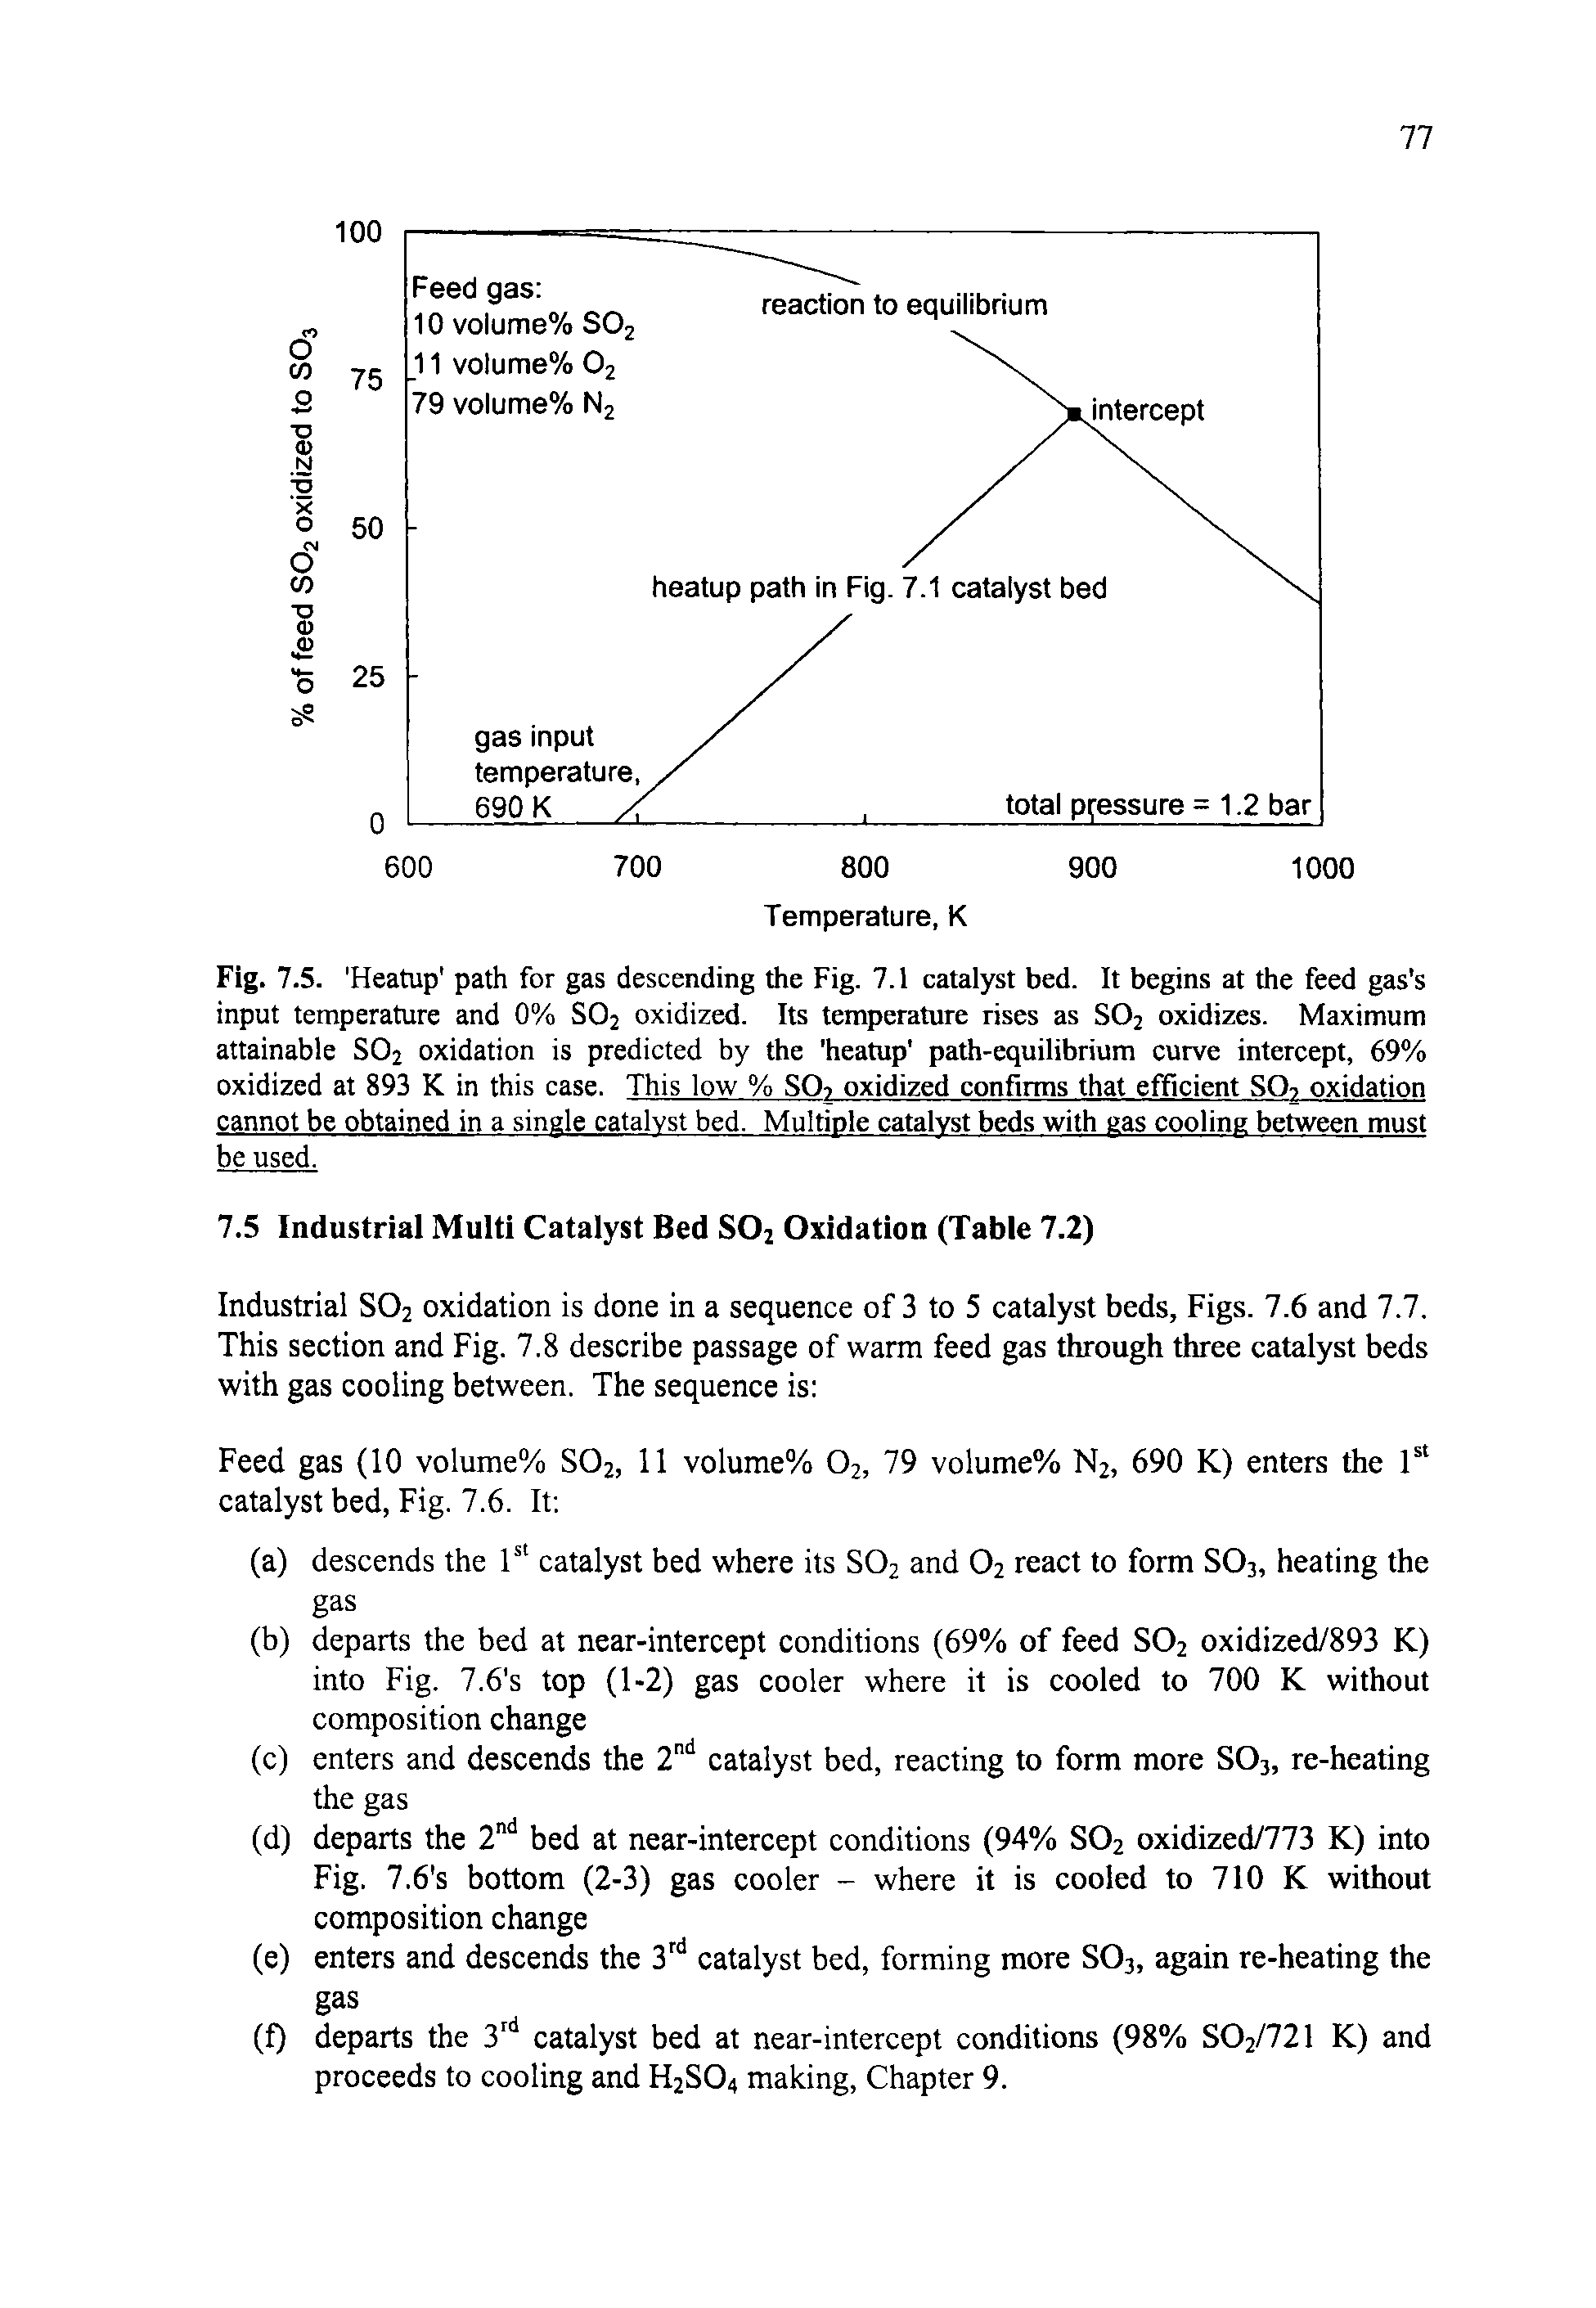 Fig. 7.5. Heatup path for gas descending the Fig. 7.1 catalyst bed. It begins at the feed gas s input temperature and 0% SO2 oxidized. Its temperature rises as S02 oxidizes. Maximum attainable S02 oxidation is predicted by the heatup path-equilibrium curve intercept, 69% oxidized at 893 K in this case. This low % SO> oxidized confirms that efficient SO-> oxidation cannot be obtained in a single catalyst bed. Multiple catalyst beds with gas cooling between must be used.